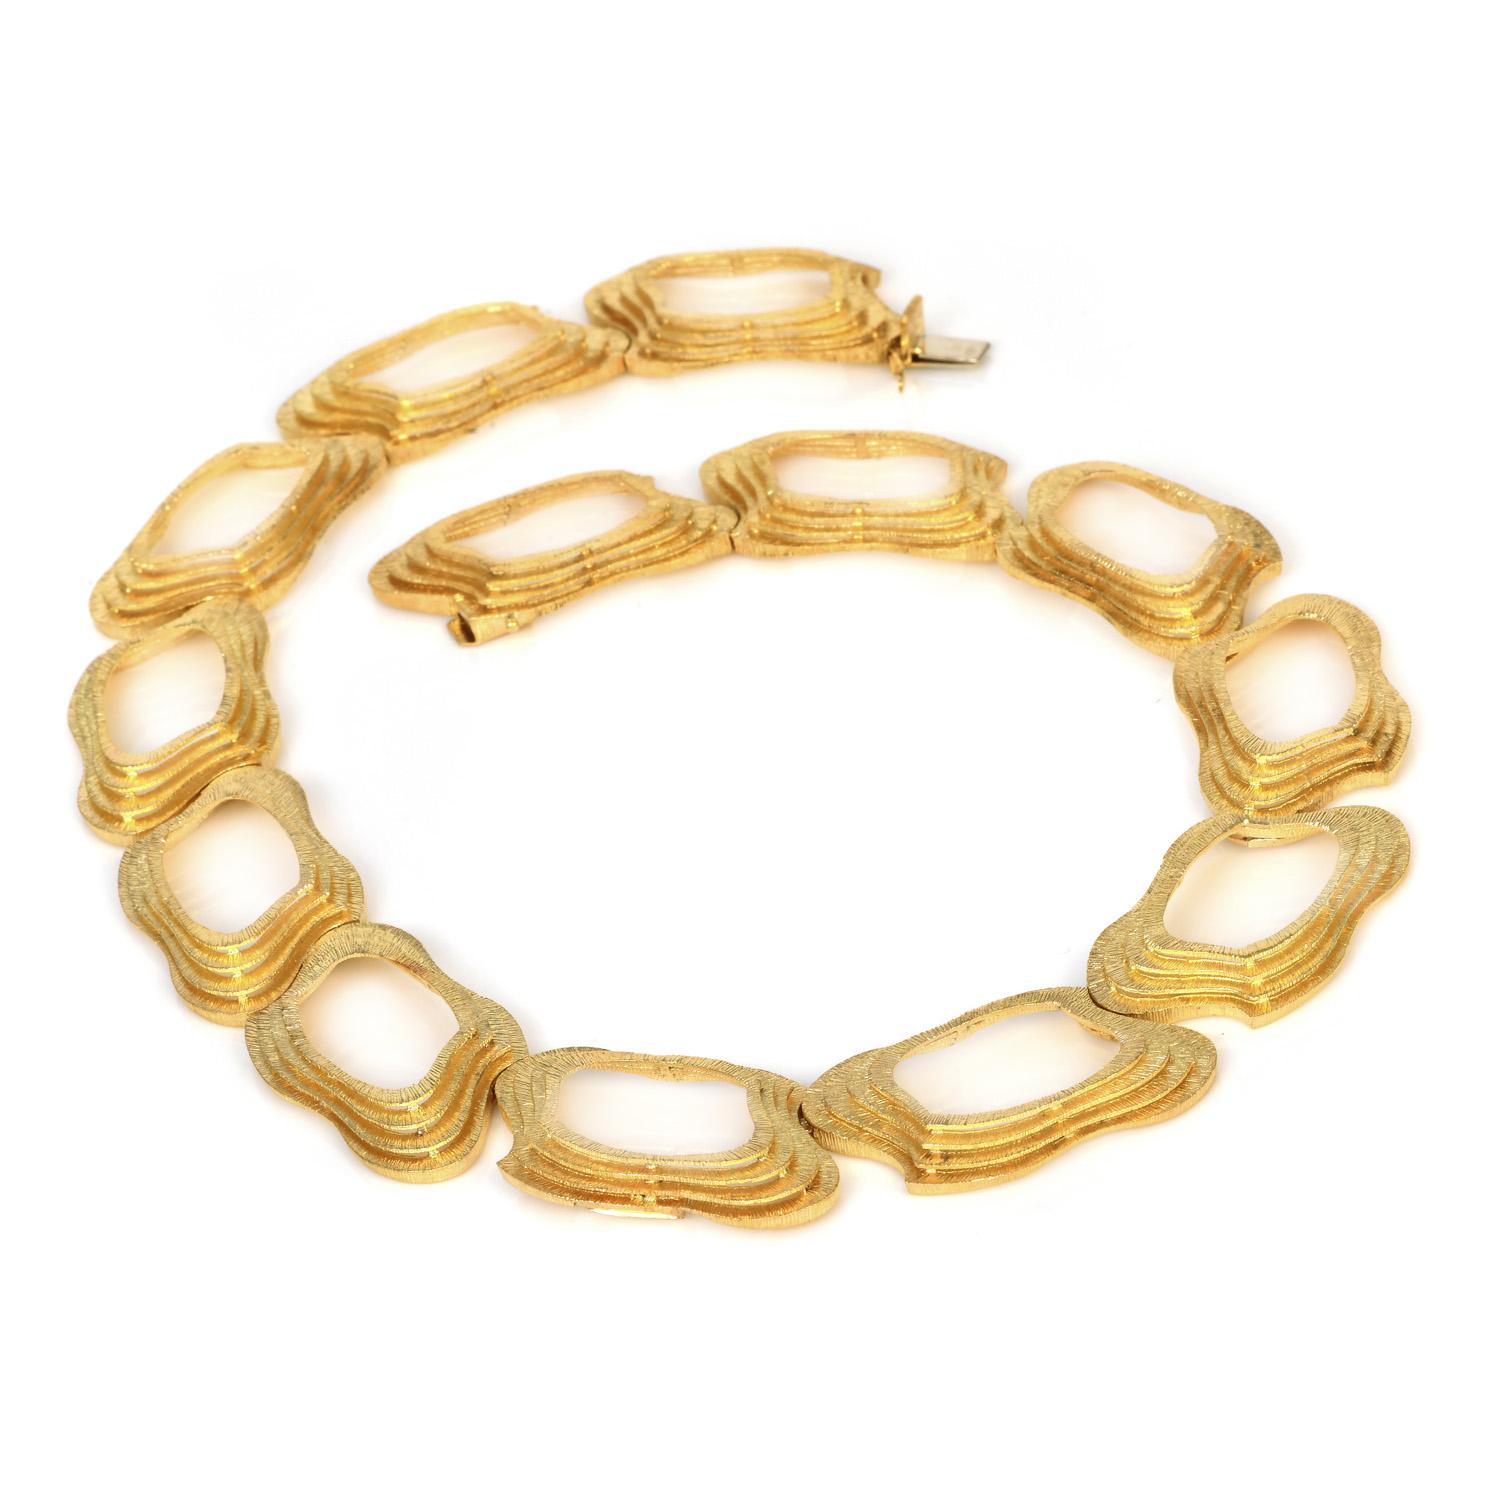  The perfect way to enhance the look for that special woman. 

This Italian estate necklace is crafted in solid 18K yellow gold, this exquisite piece has 13 open links, fancy cushion-shaped, with a stacked textured design finely made in luxurious